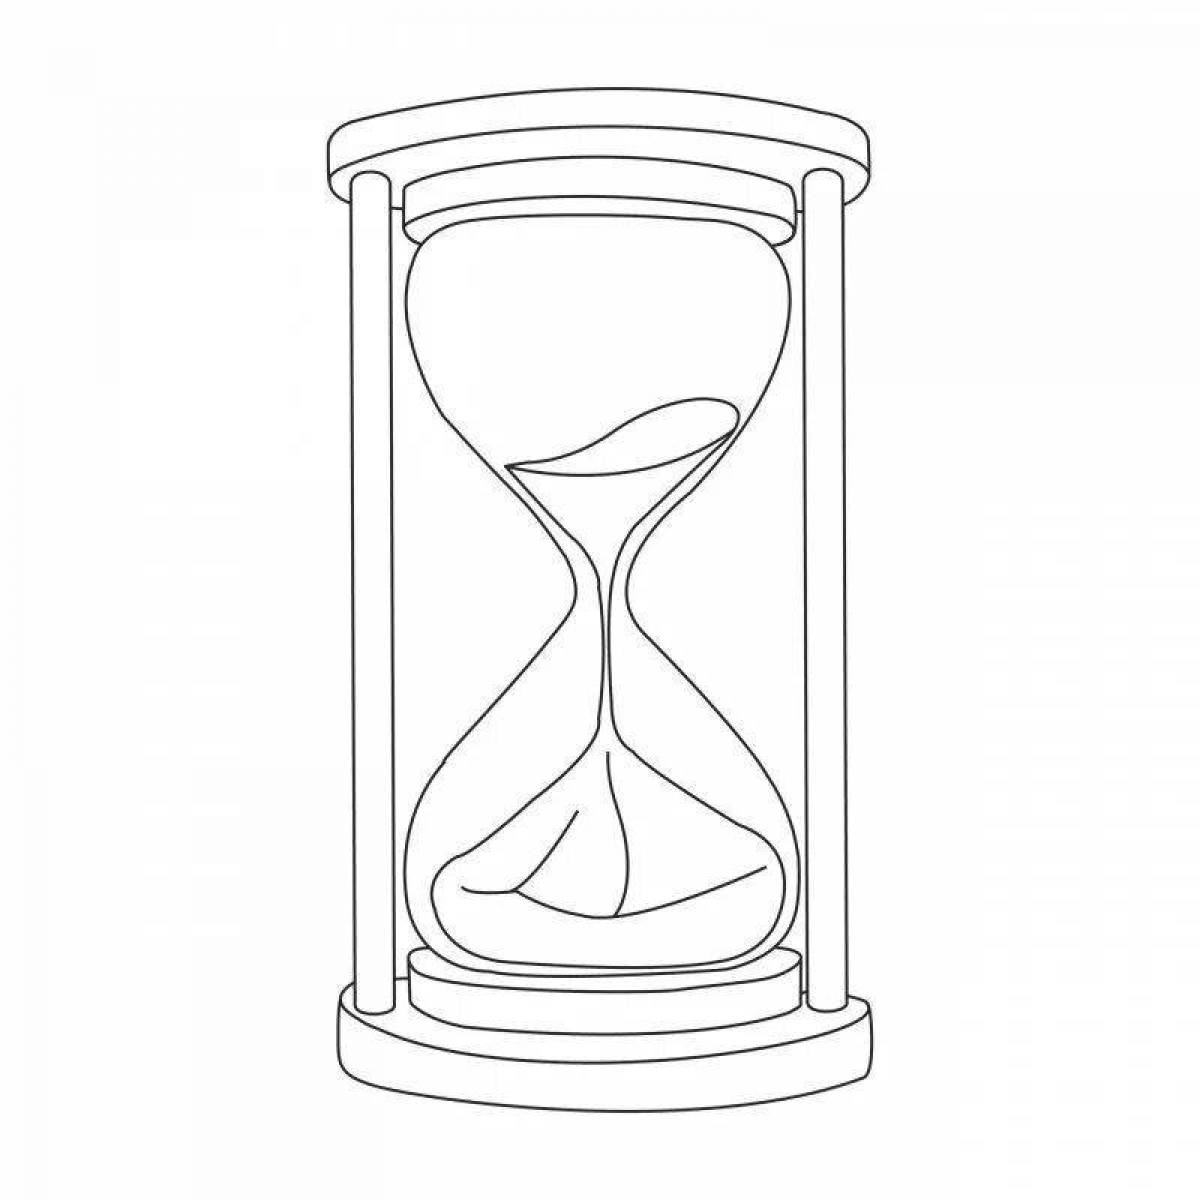 Amazing Hourglass Coloring Page